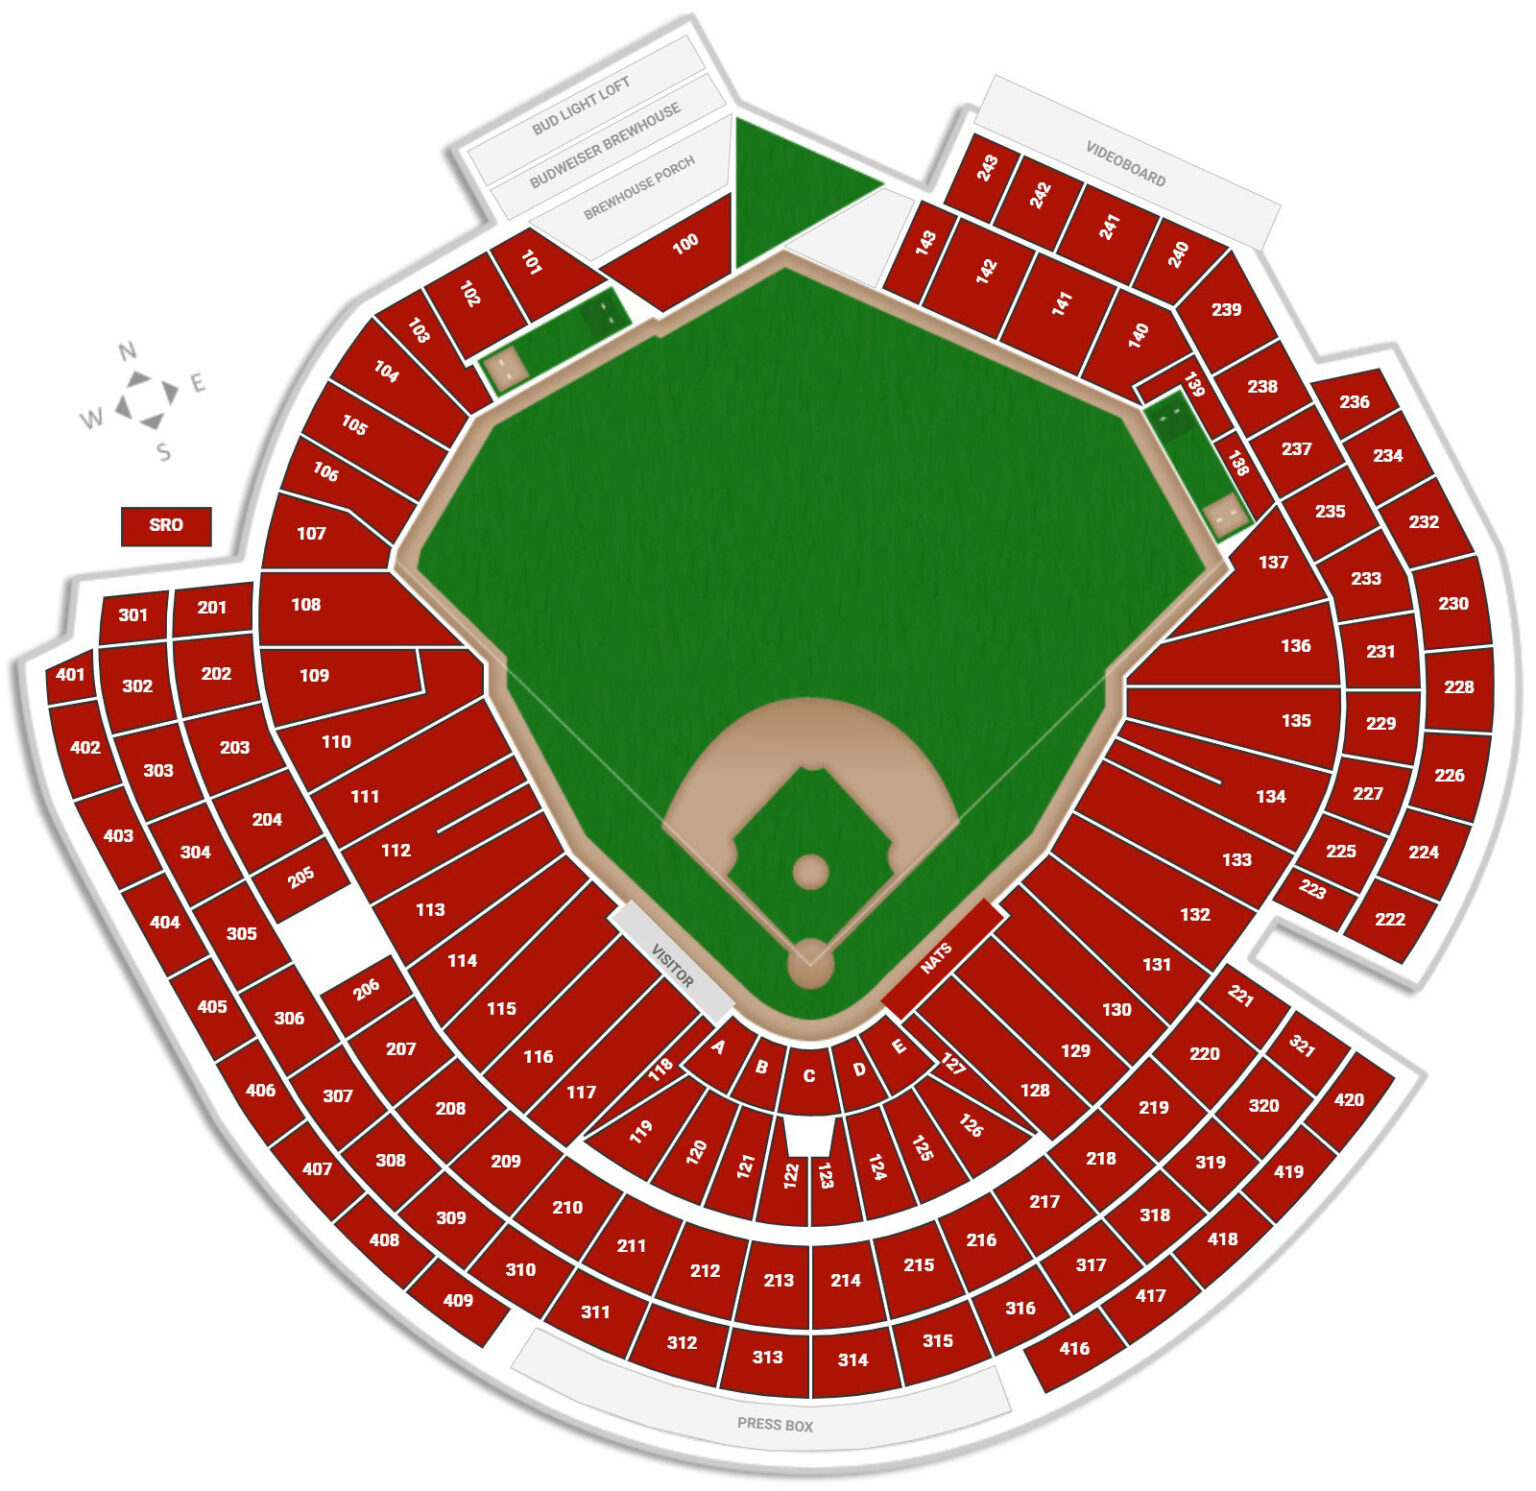 Nationals Park Seating Plan Seating plans of Sport arenas around the